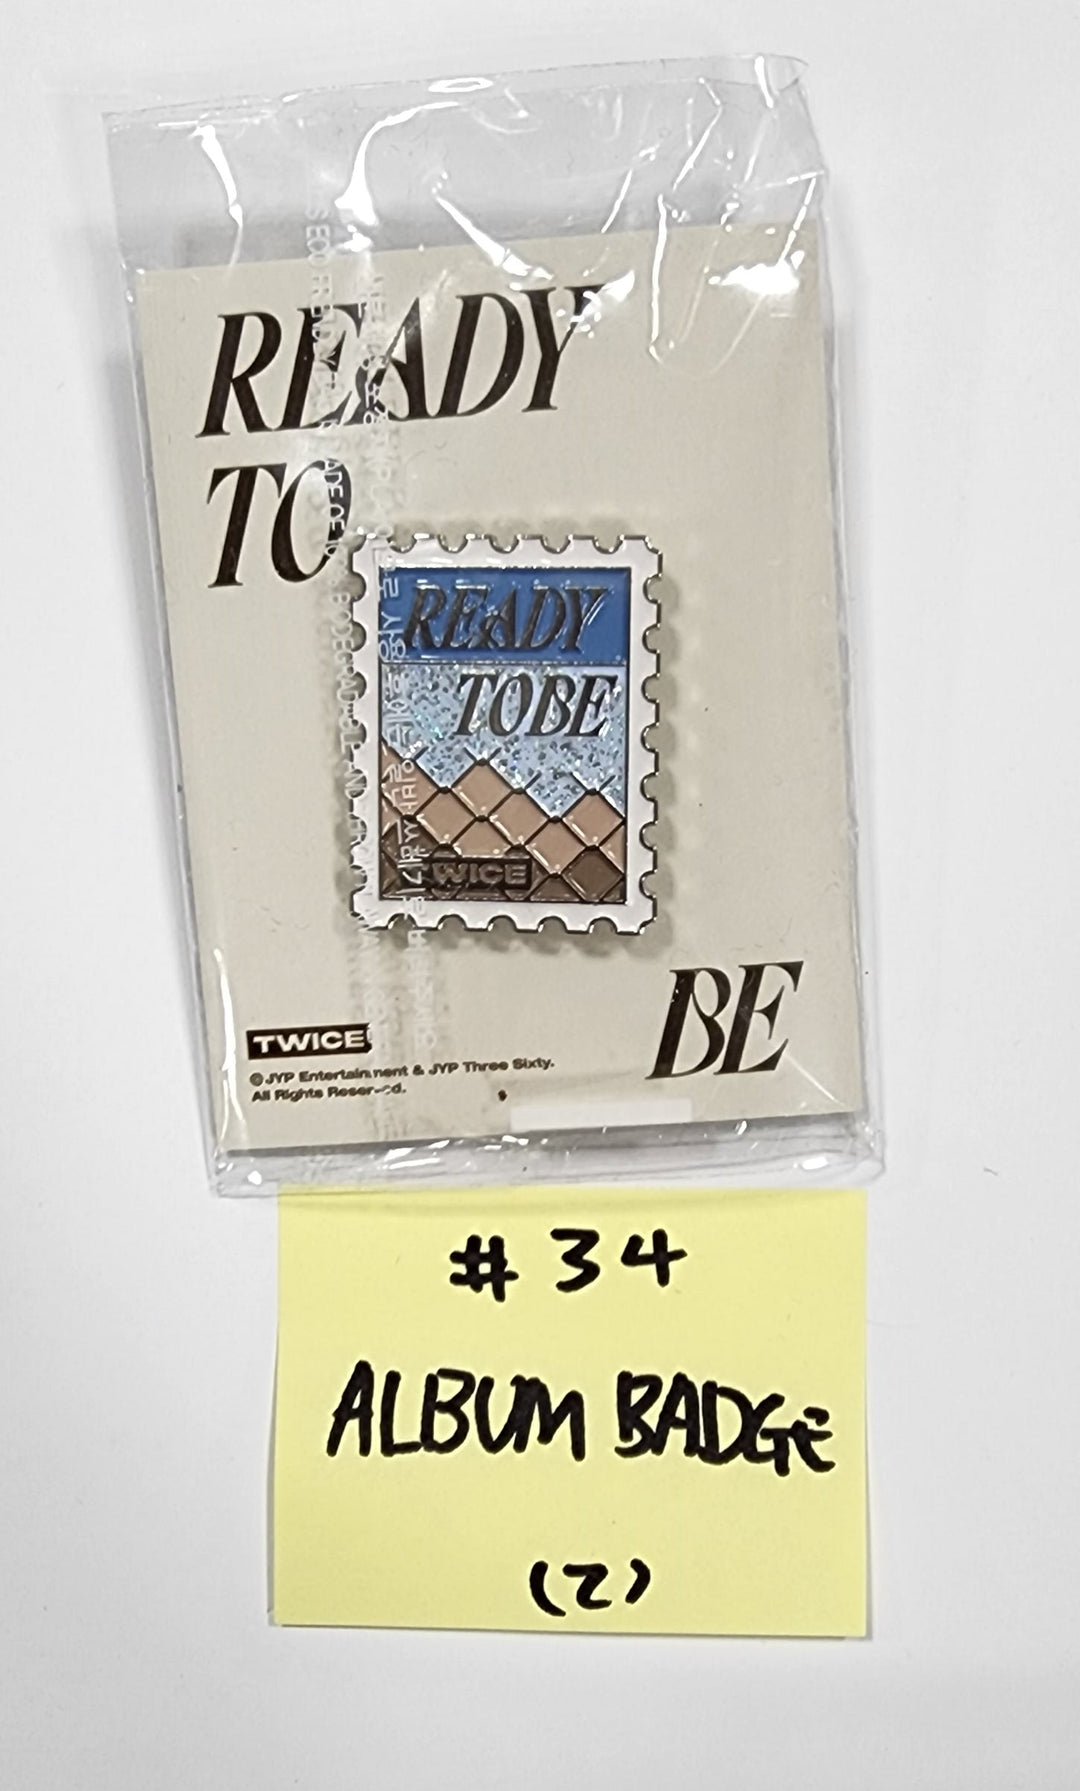 Twice 5th "World Tour Ready To Be" - Official MD [Episode Photobook, Trading Card, Masking Tape, ID Set, Collect Book, Acrylic Kit, Frame Keyring, Sticker Pack, Camera, T-shirt, Candybong Beads Strap, Badge, Candybong Lovely Cape] [Restocked 6/19]